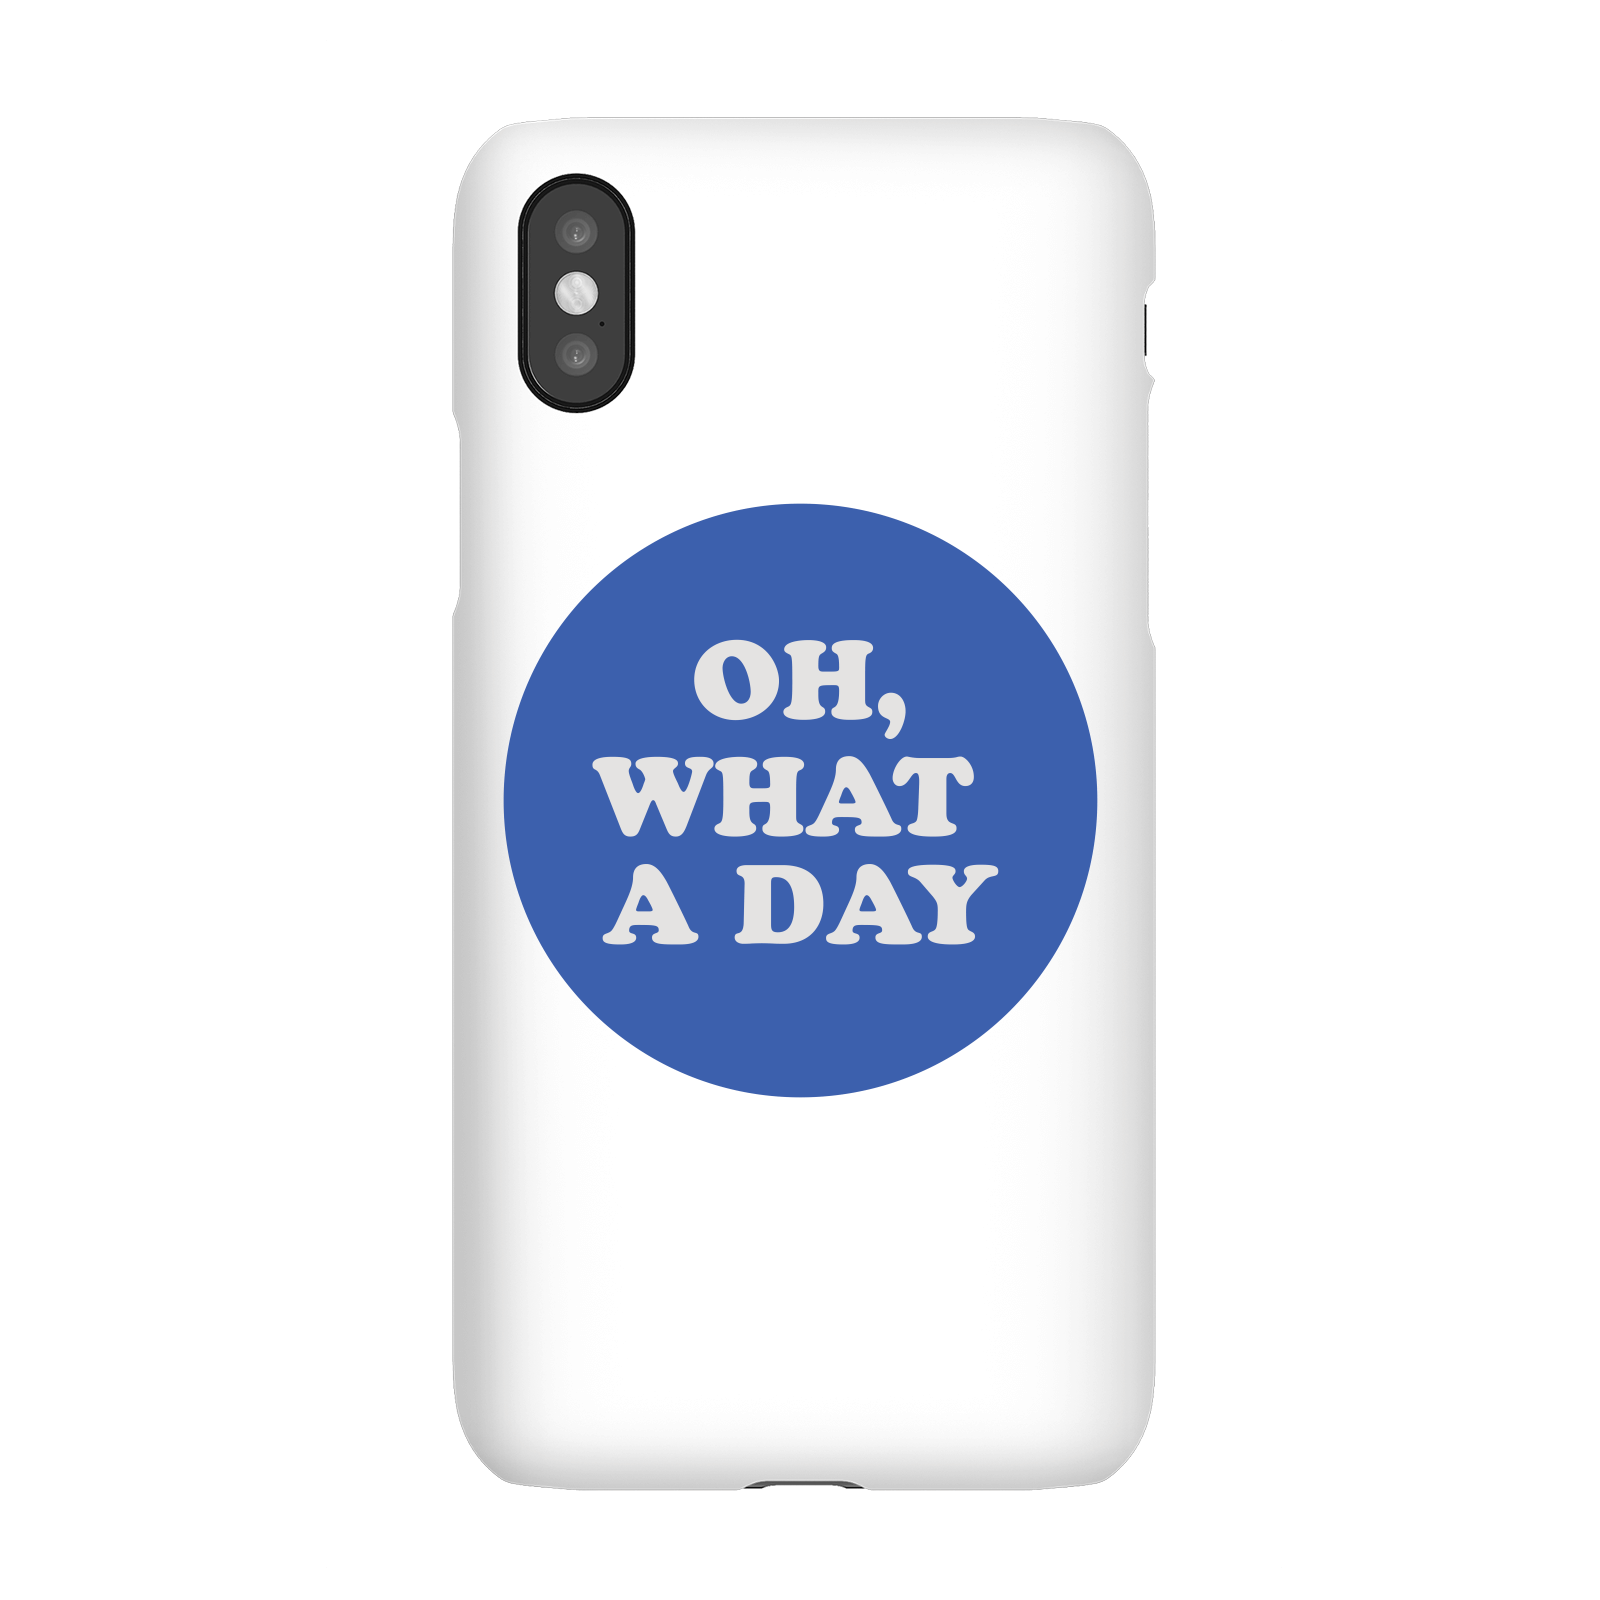 Oh, What A Day Phone Case for iPhone and Android - iPhone 5/5s - Snap Case - Matte